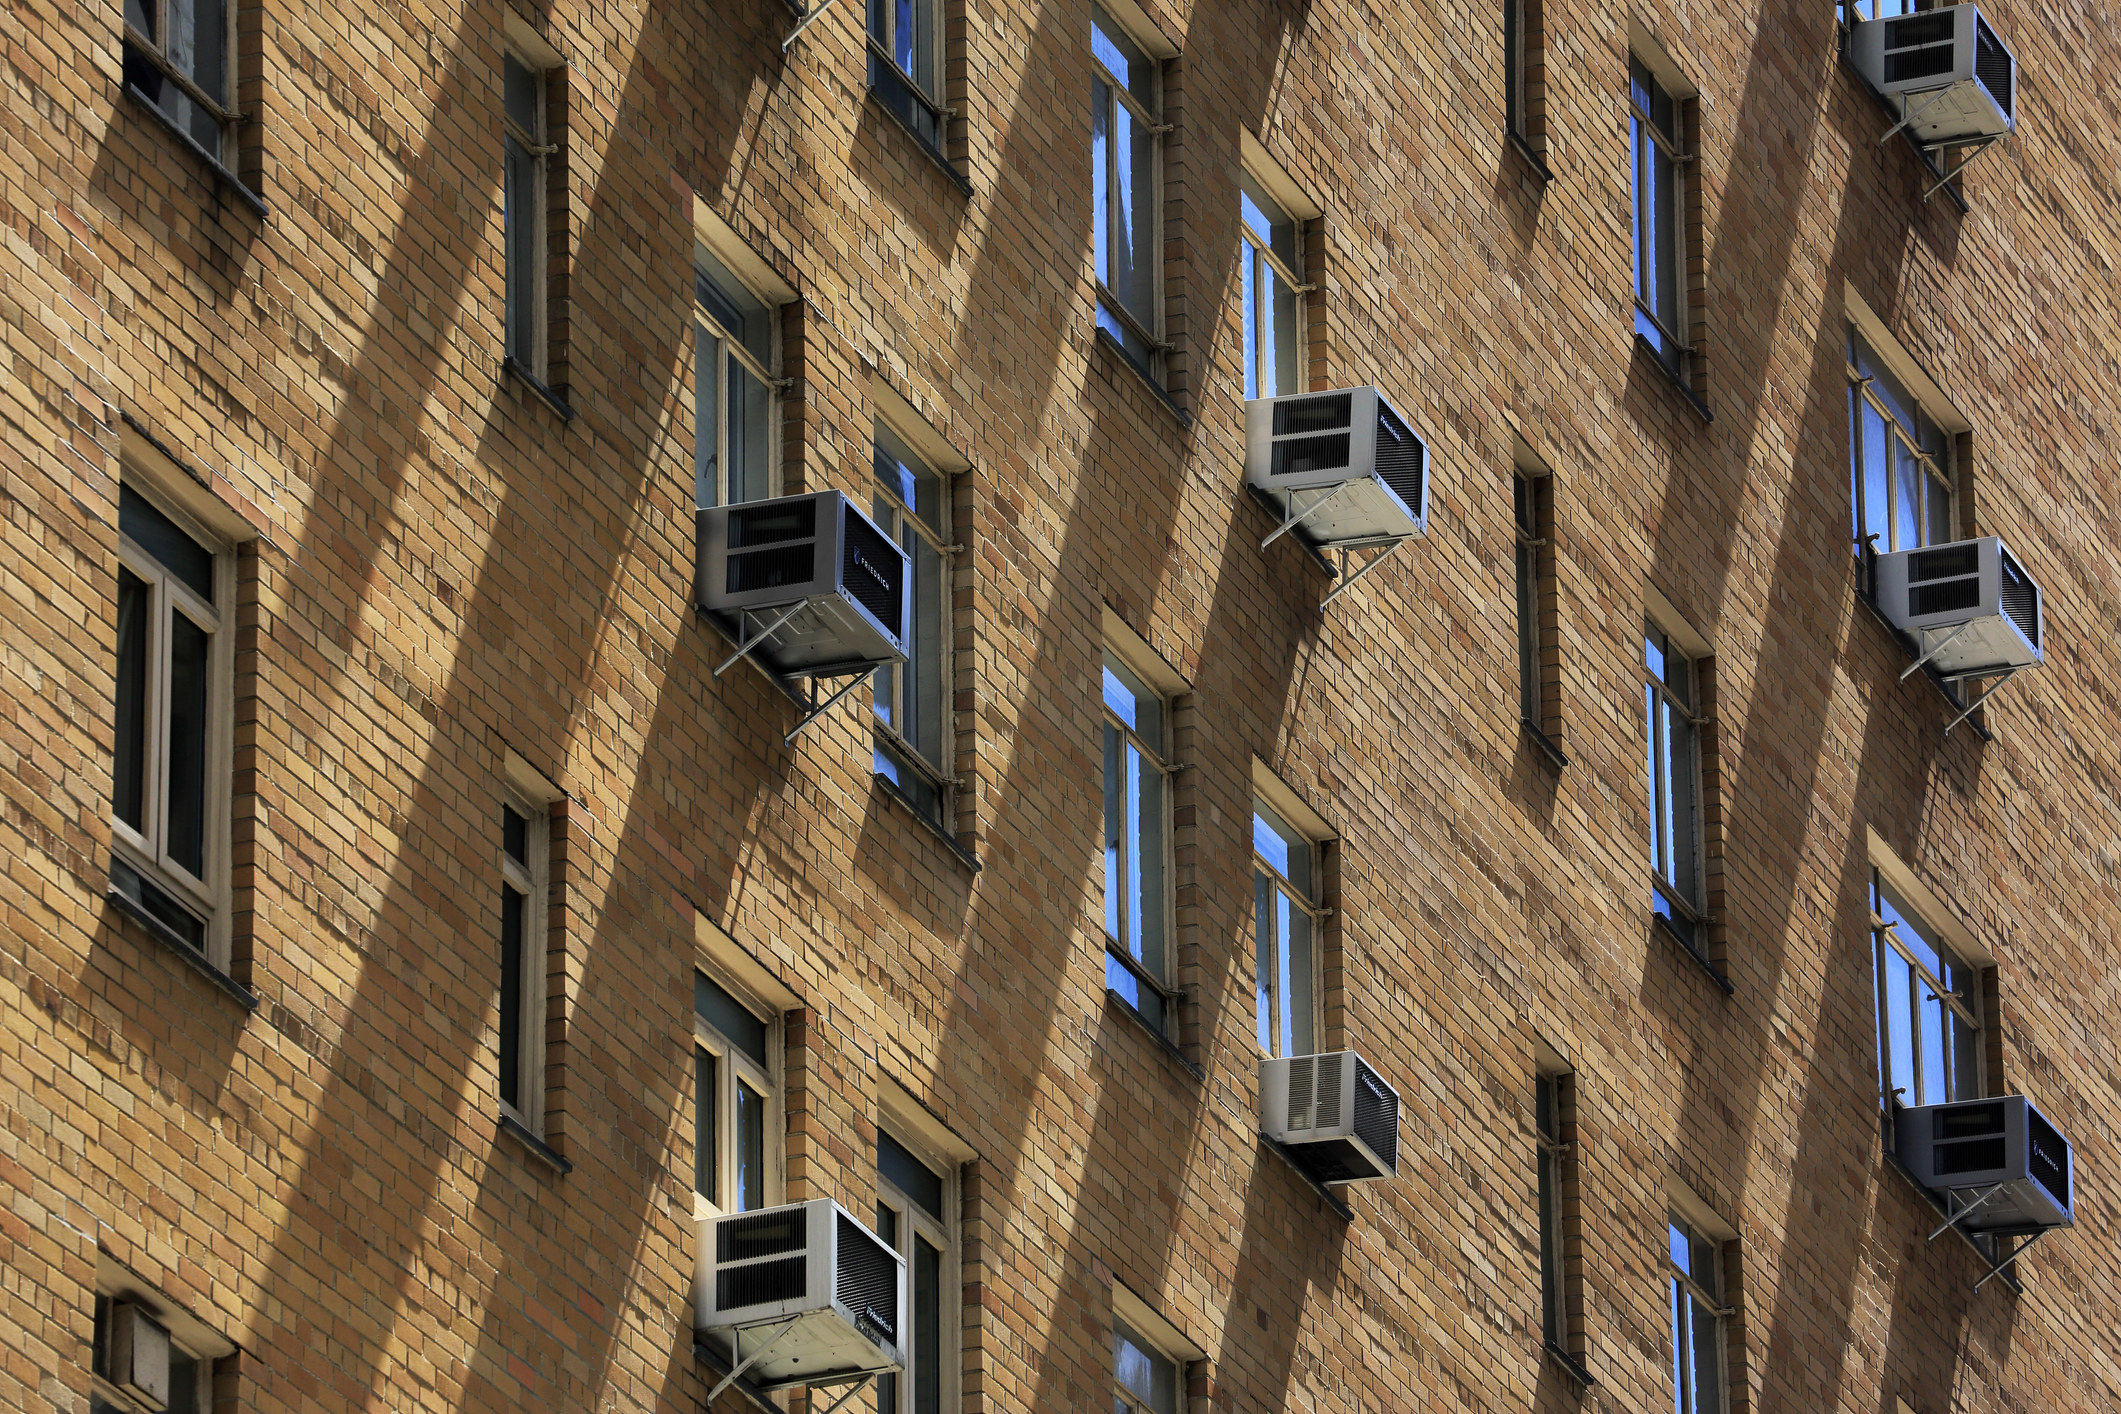 Air conditioning units in an apartment window